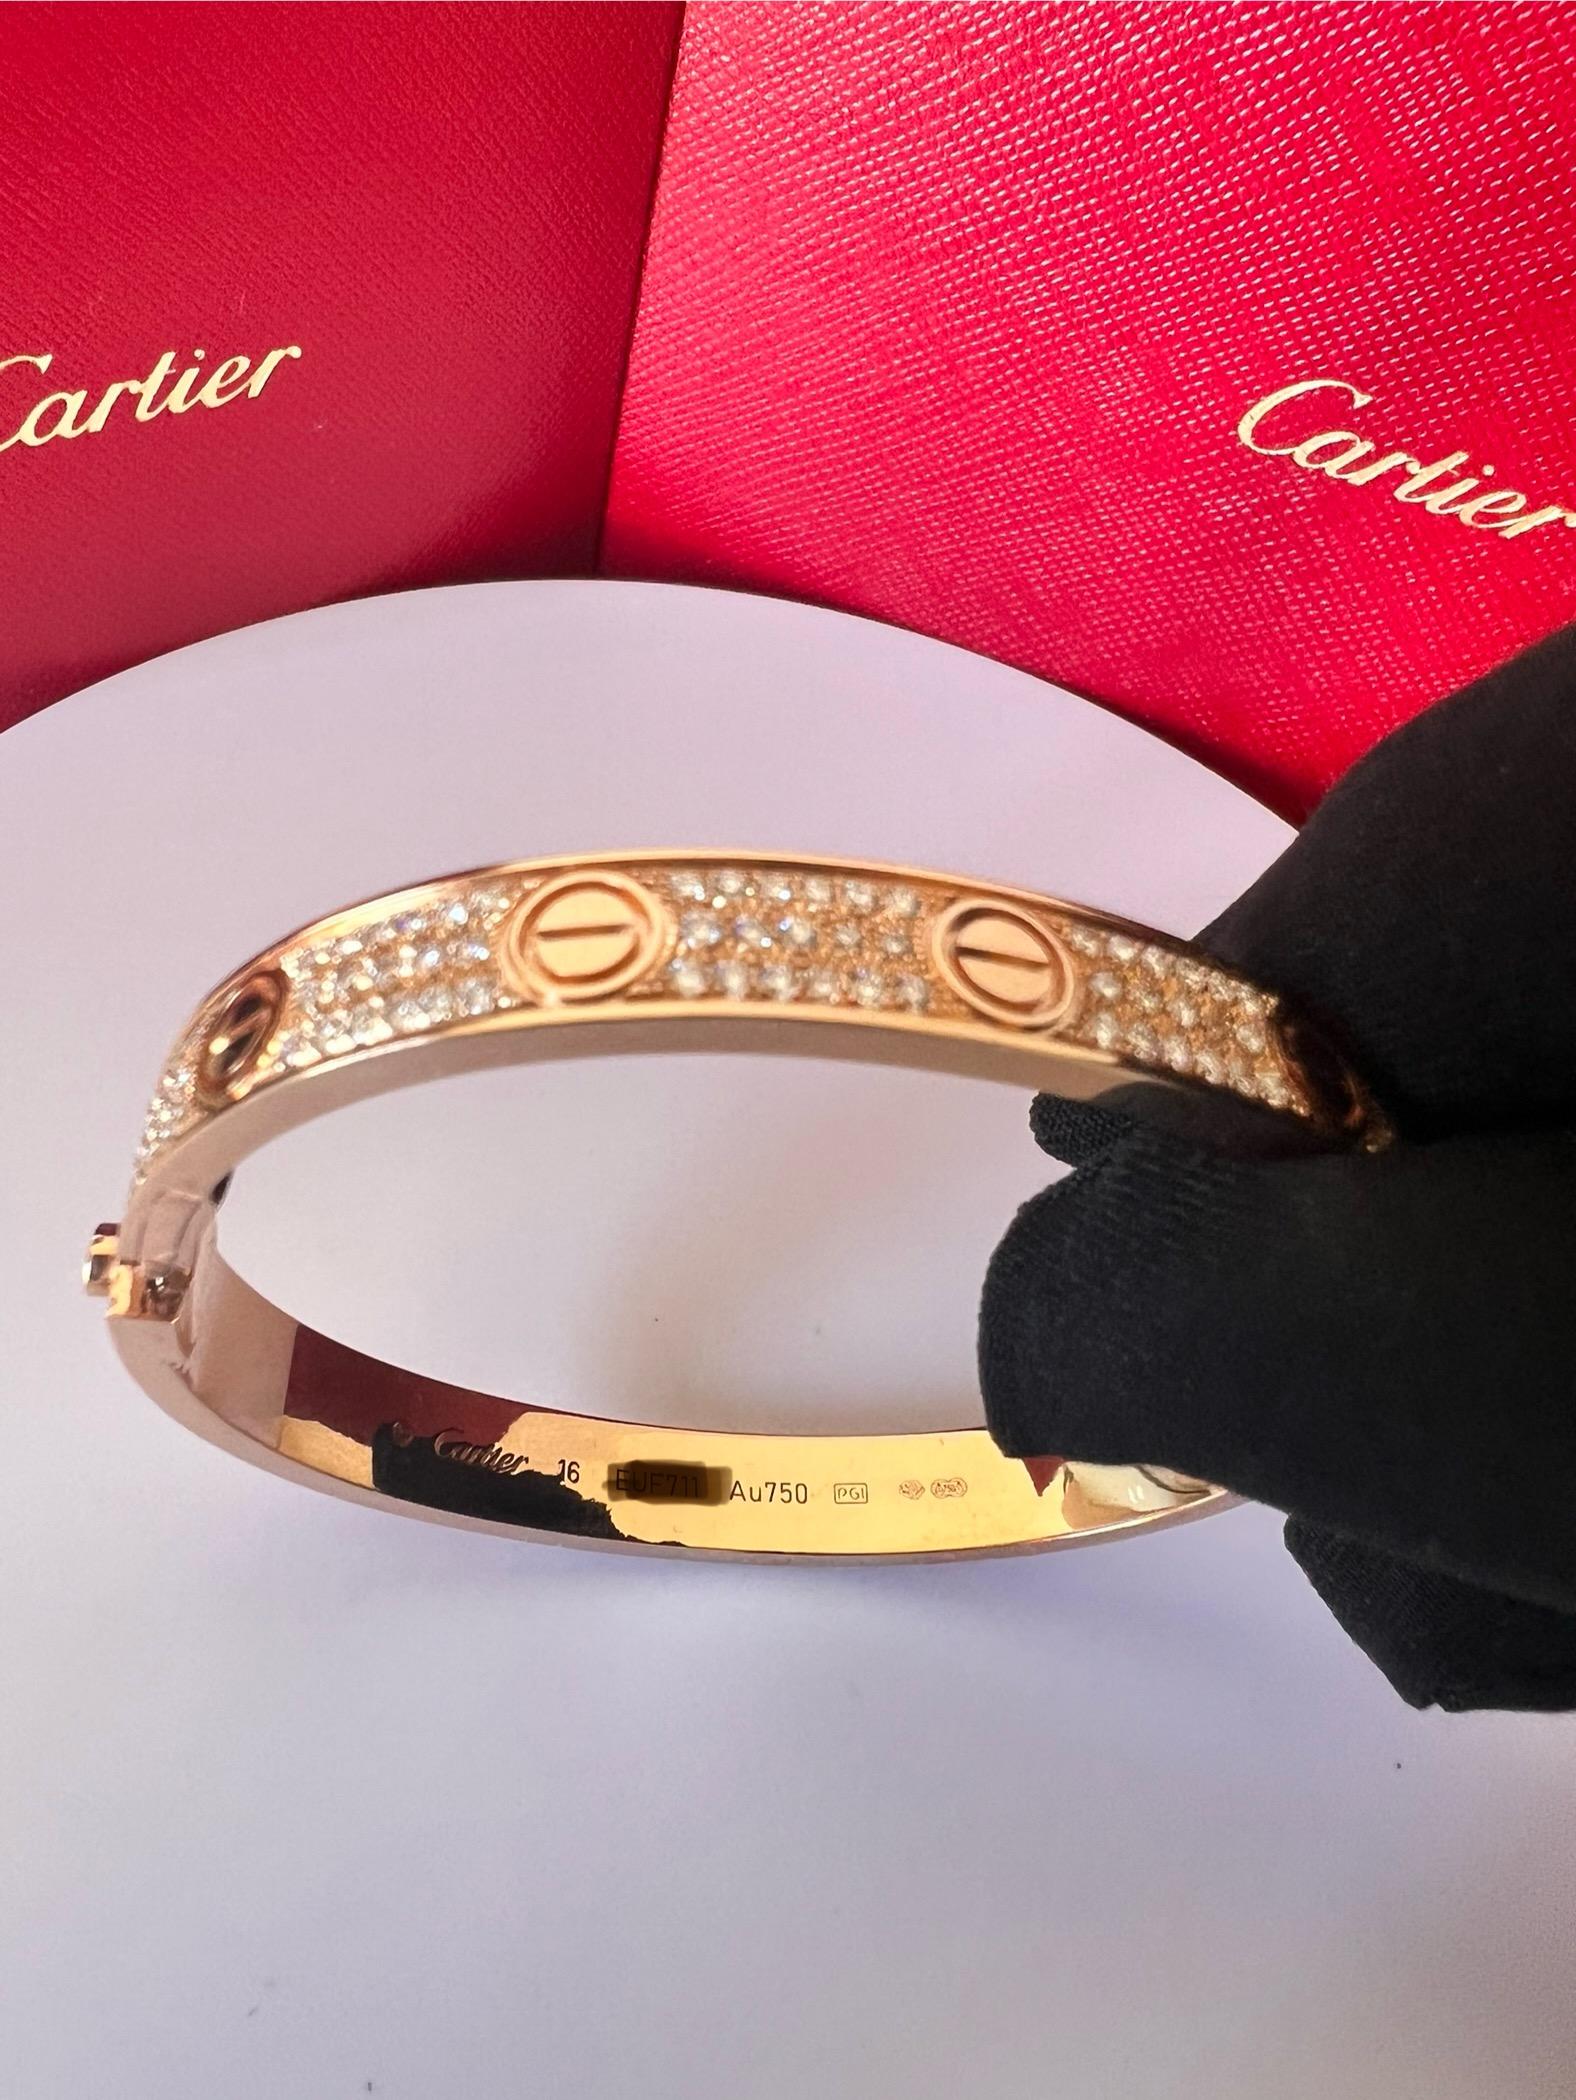 CARTIER LOVE BRACELET
Cartier 'Love' bangle bracelet crafted in 18 karat rose gold with gold screw tops and pave set round brilliant cut diamonds (D-F in color, VVS clarity)
Signed Cartier,  750, with serial number and hallmarks 
The bracelet is